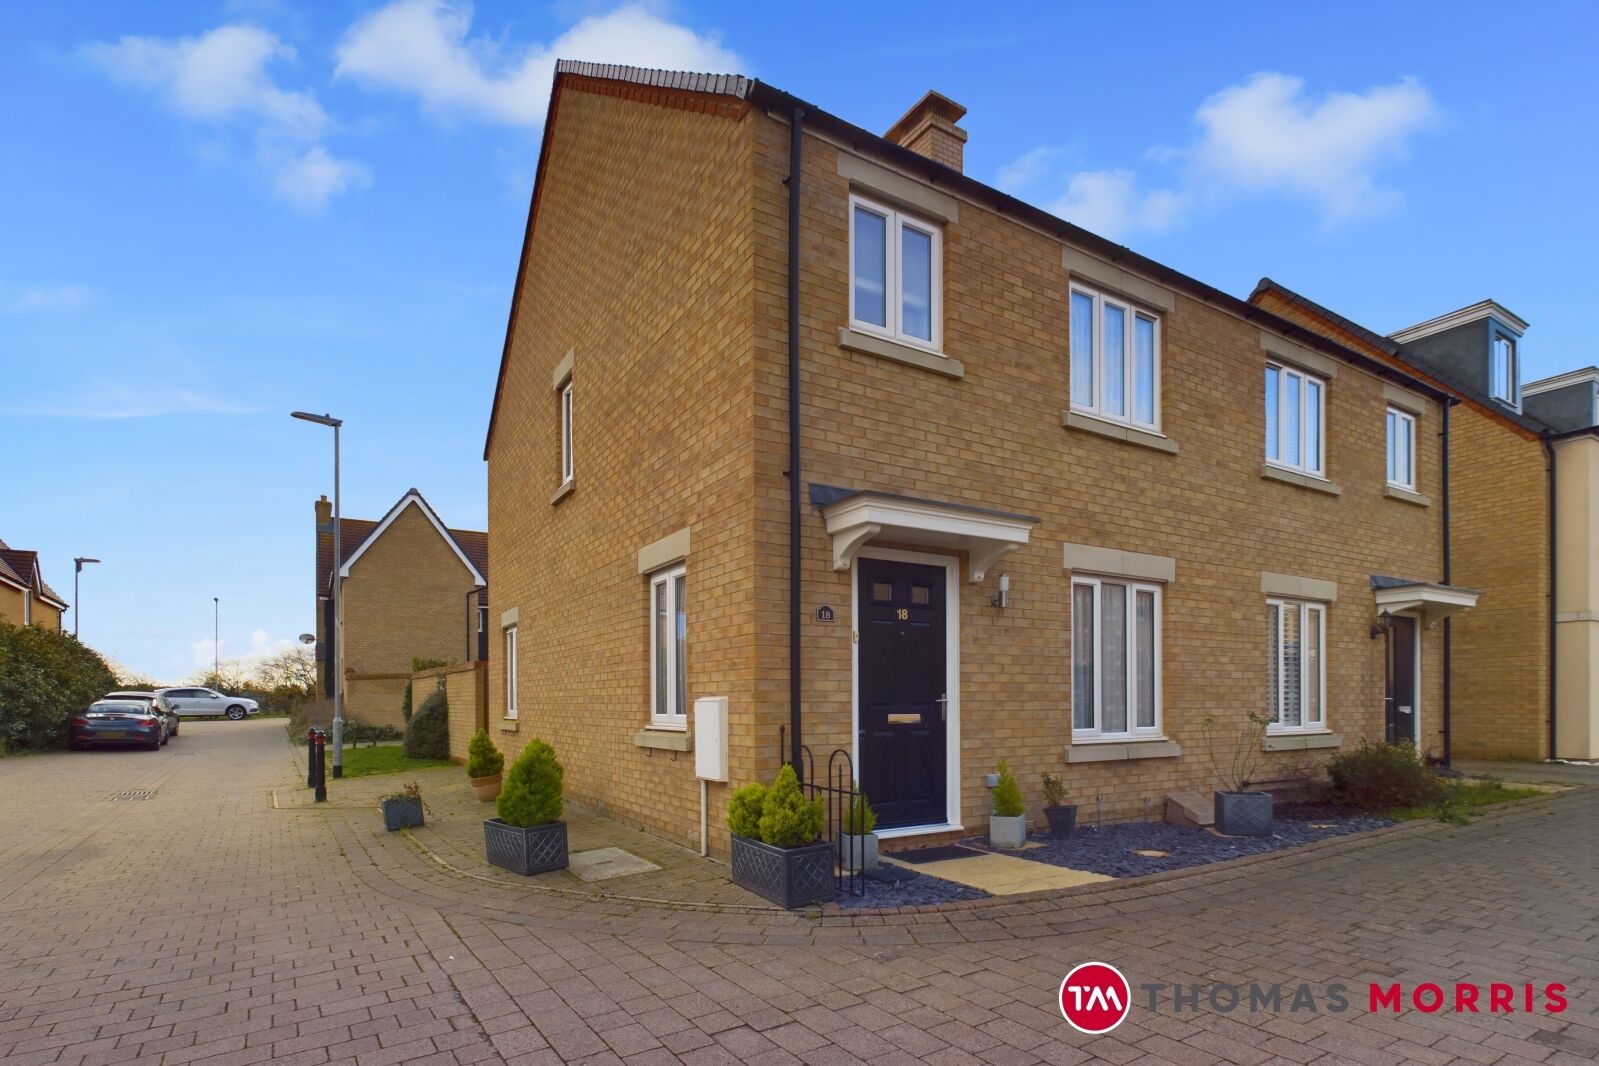 3 bedroom semi detached house for sale Arnold Rise, Biggleswade, SG18, main image